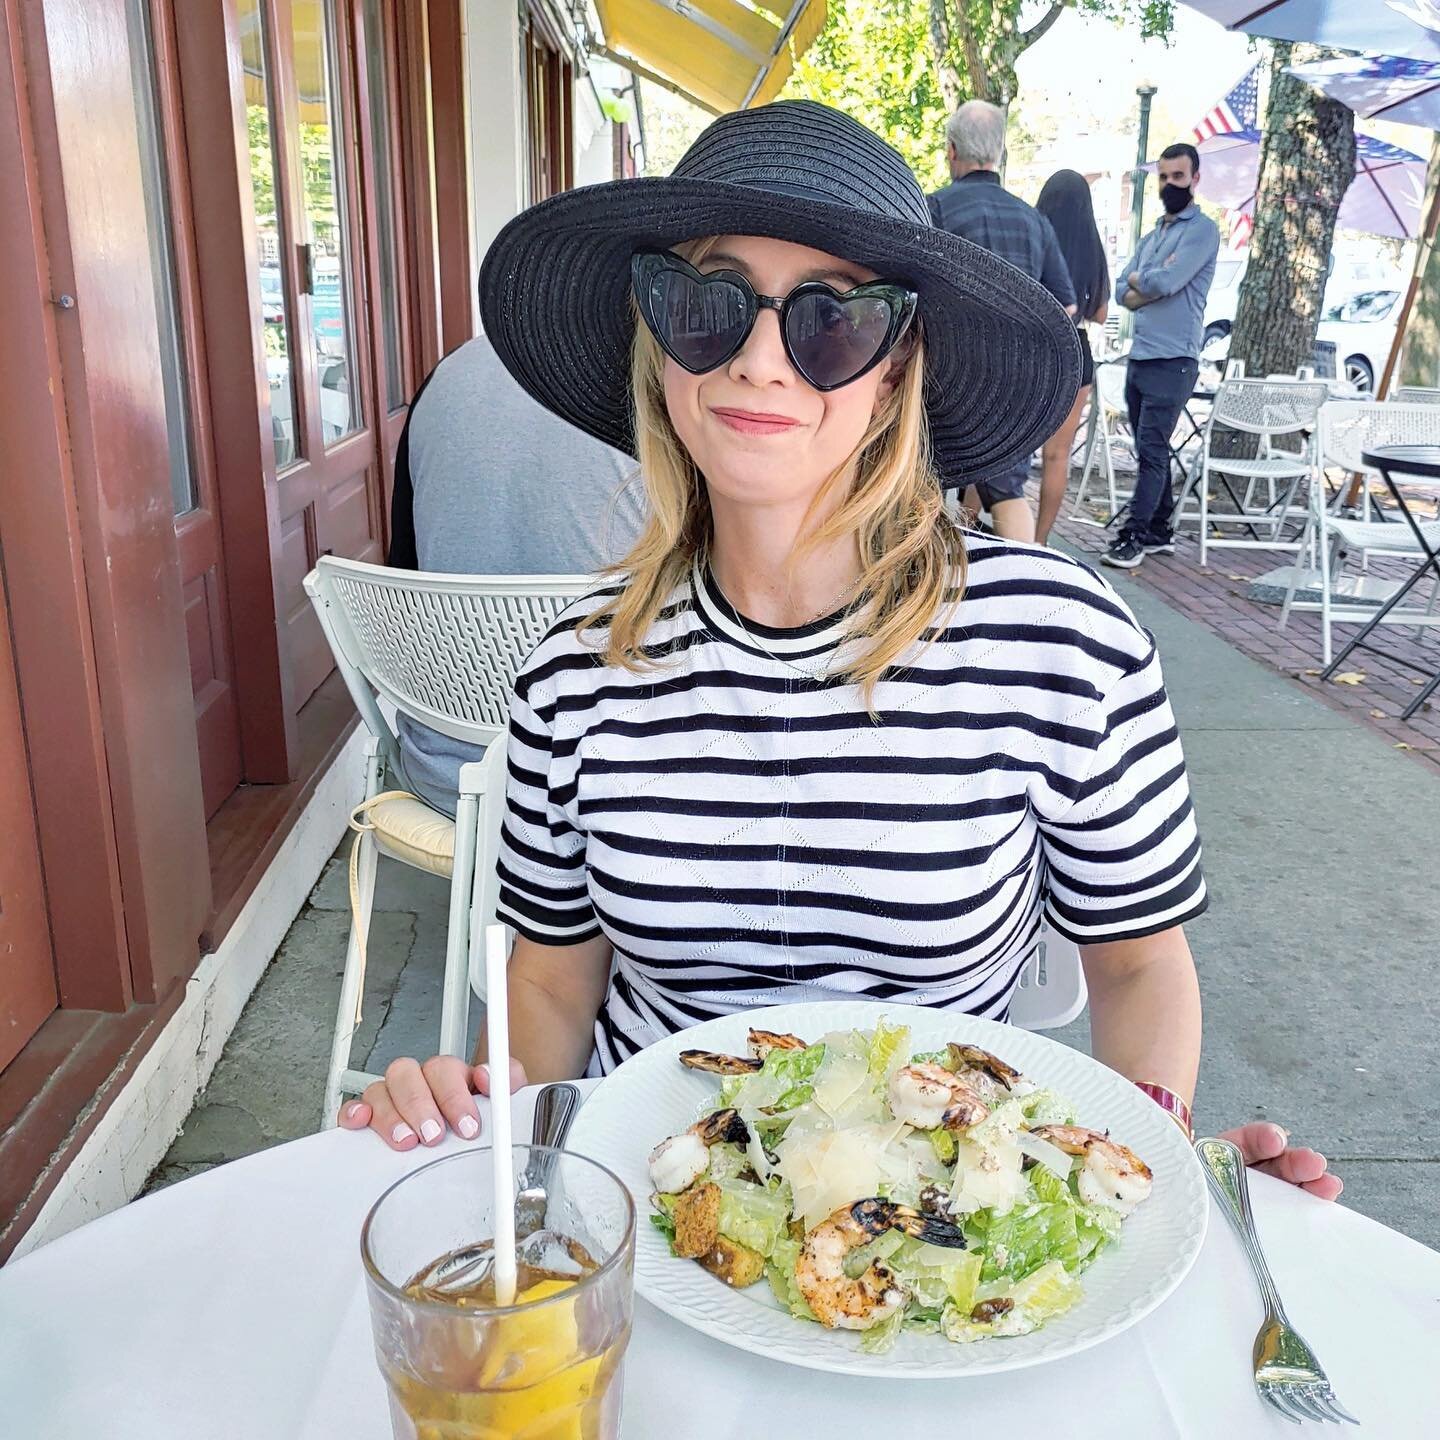 Eating a shrimp Caesar salad and living my best life. At least for another two weeks until we return back to LA. Getting away this summer has really taught me to live in the moment and appreciate what I have. 
#livingmybestlife #thehamptons #southamp